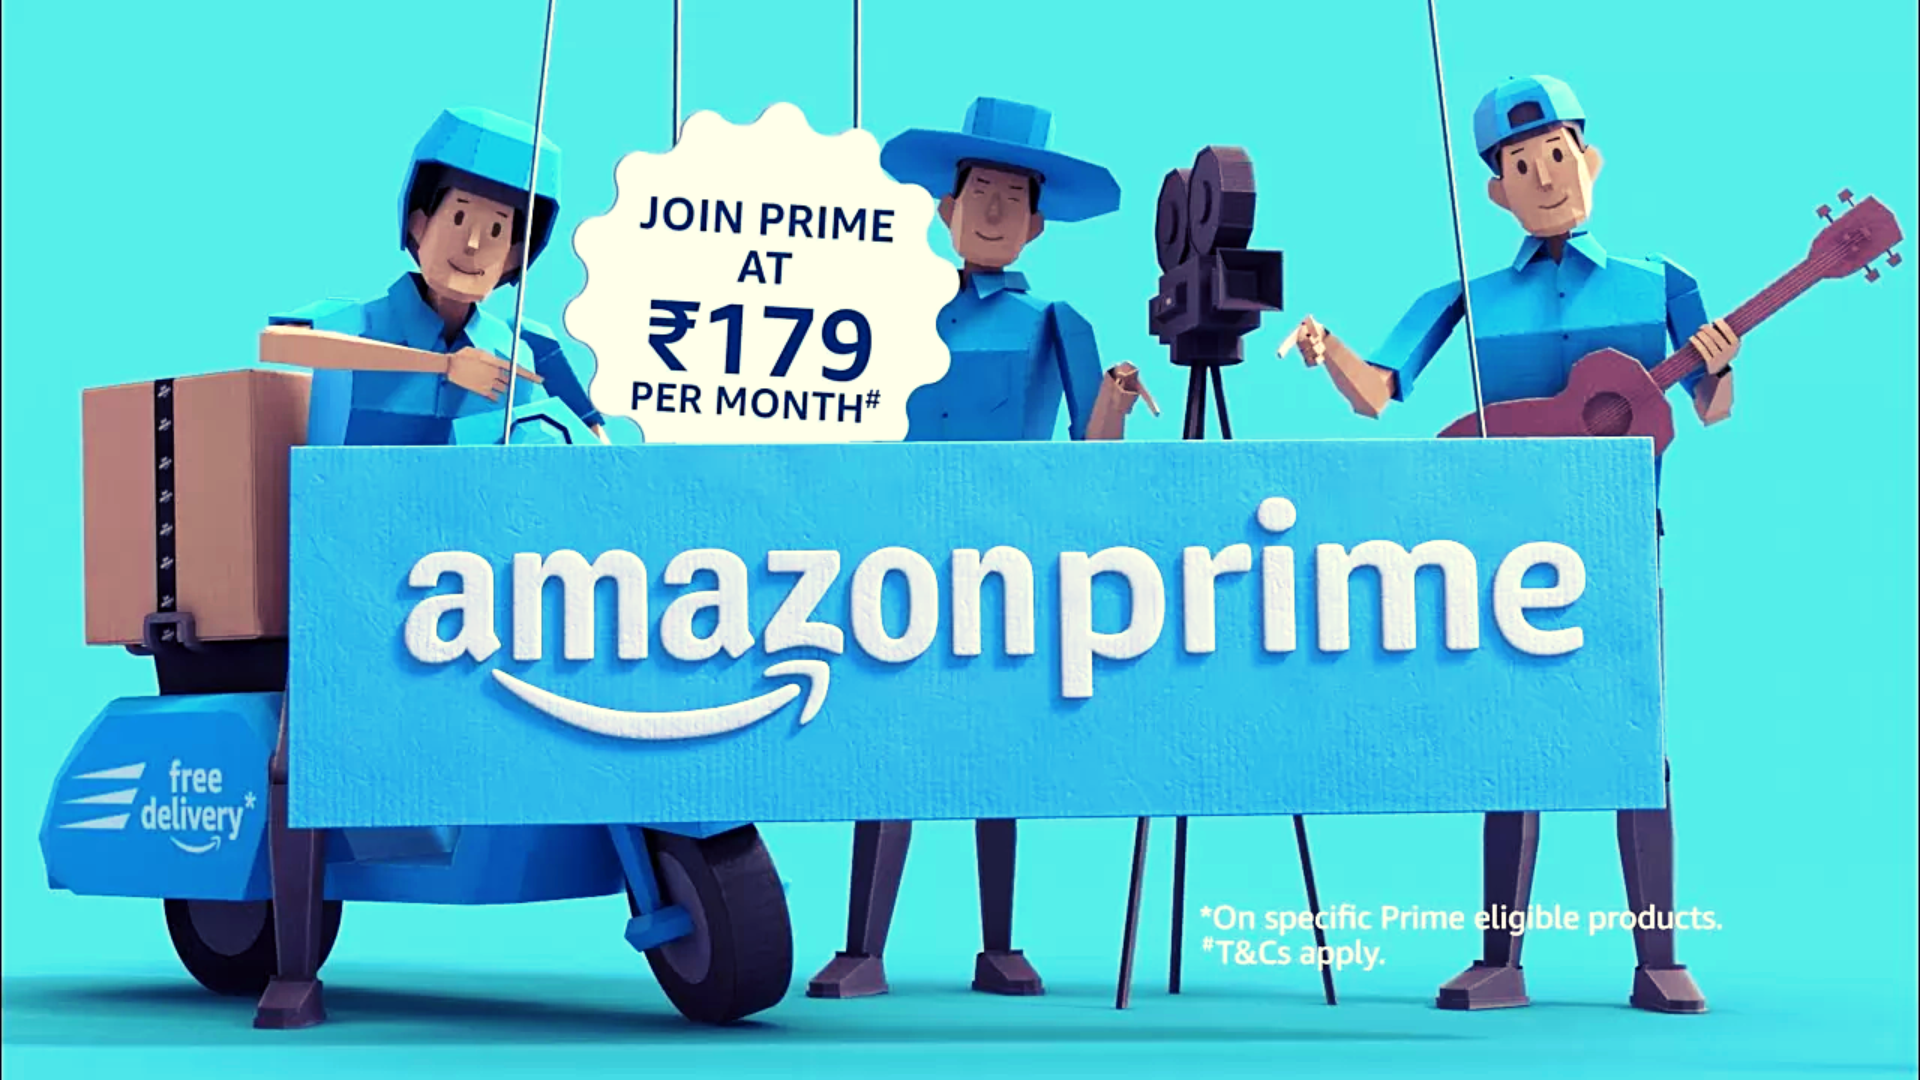 Amazon Prime One Month Subscription - Price, Benefits & More